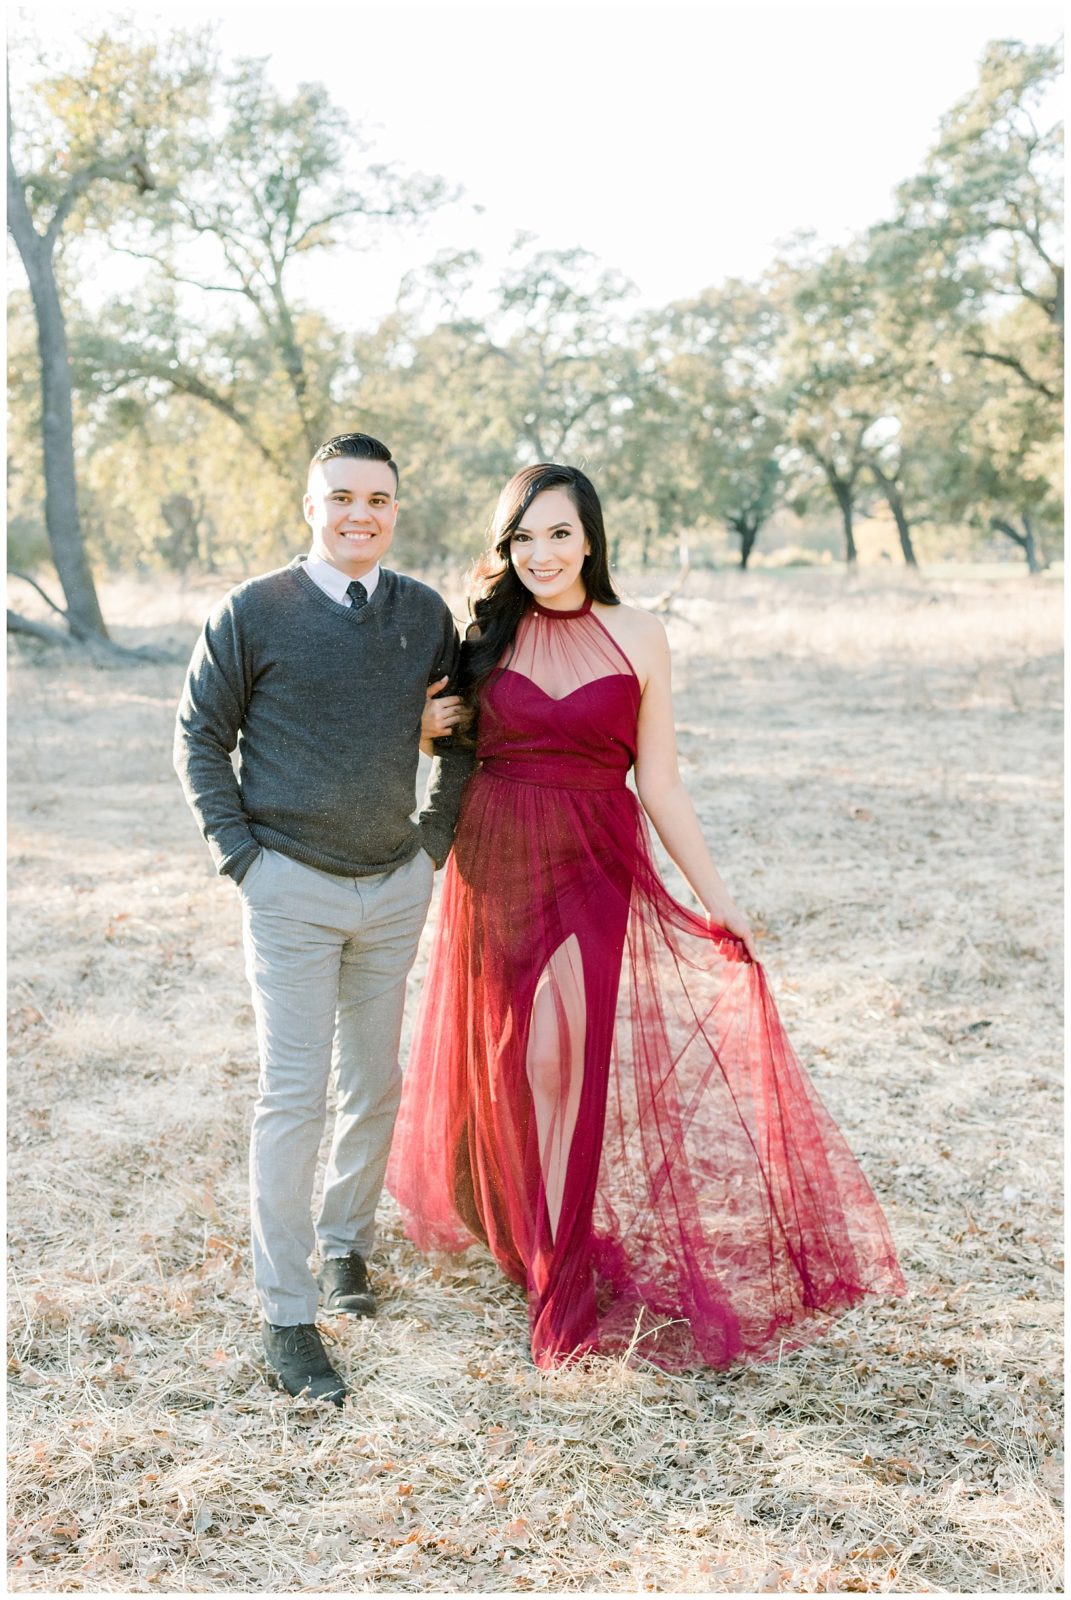 Light and Airy engagement christmas photos